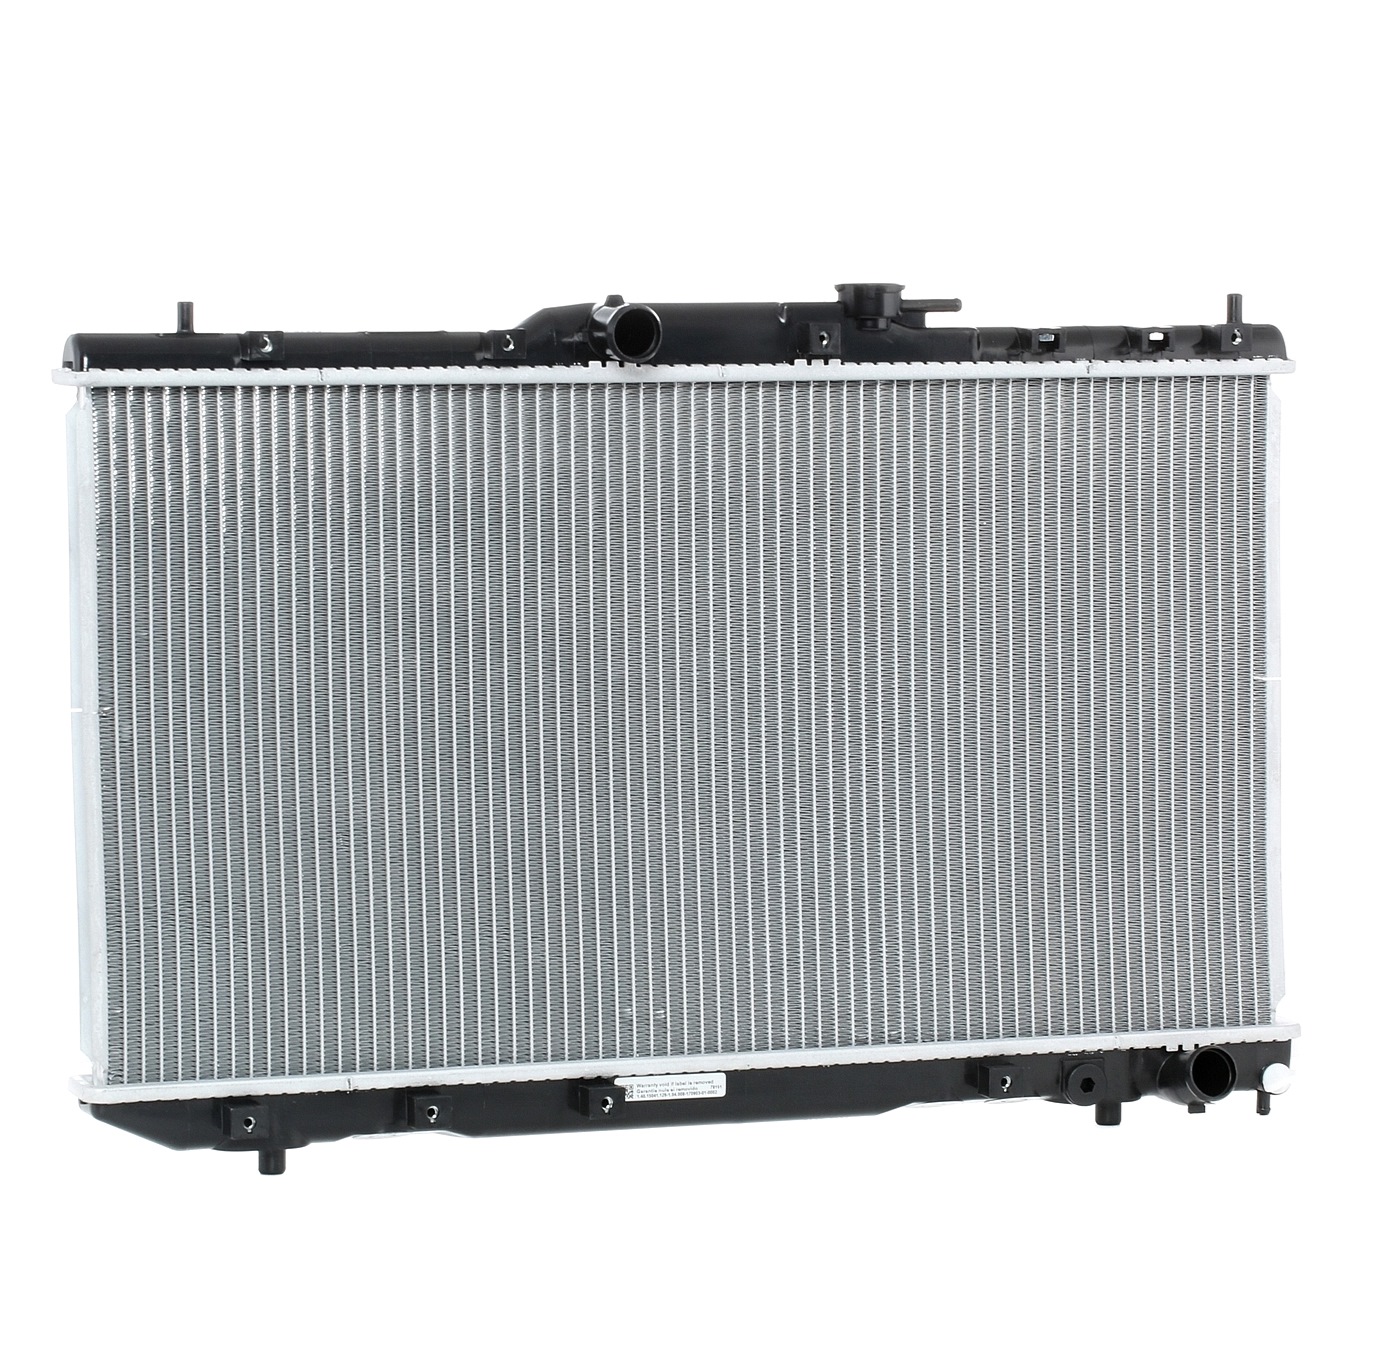 RIDEX 470R0070 Engine radiator Aluminium, Plastic, for vehicles with/without air conditioning, Manual Transmission